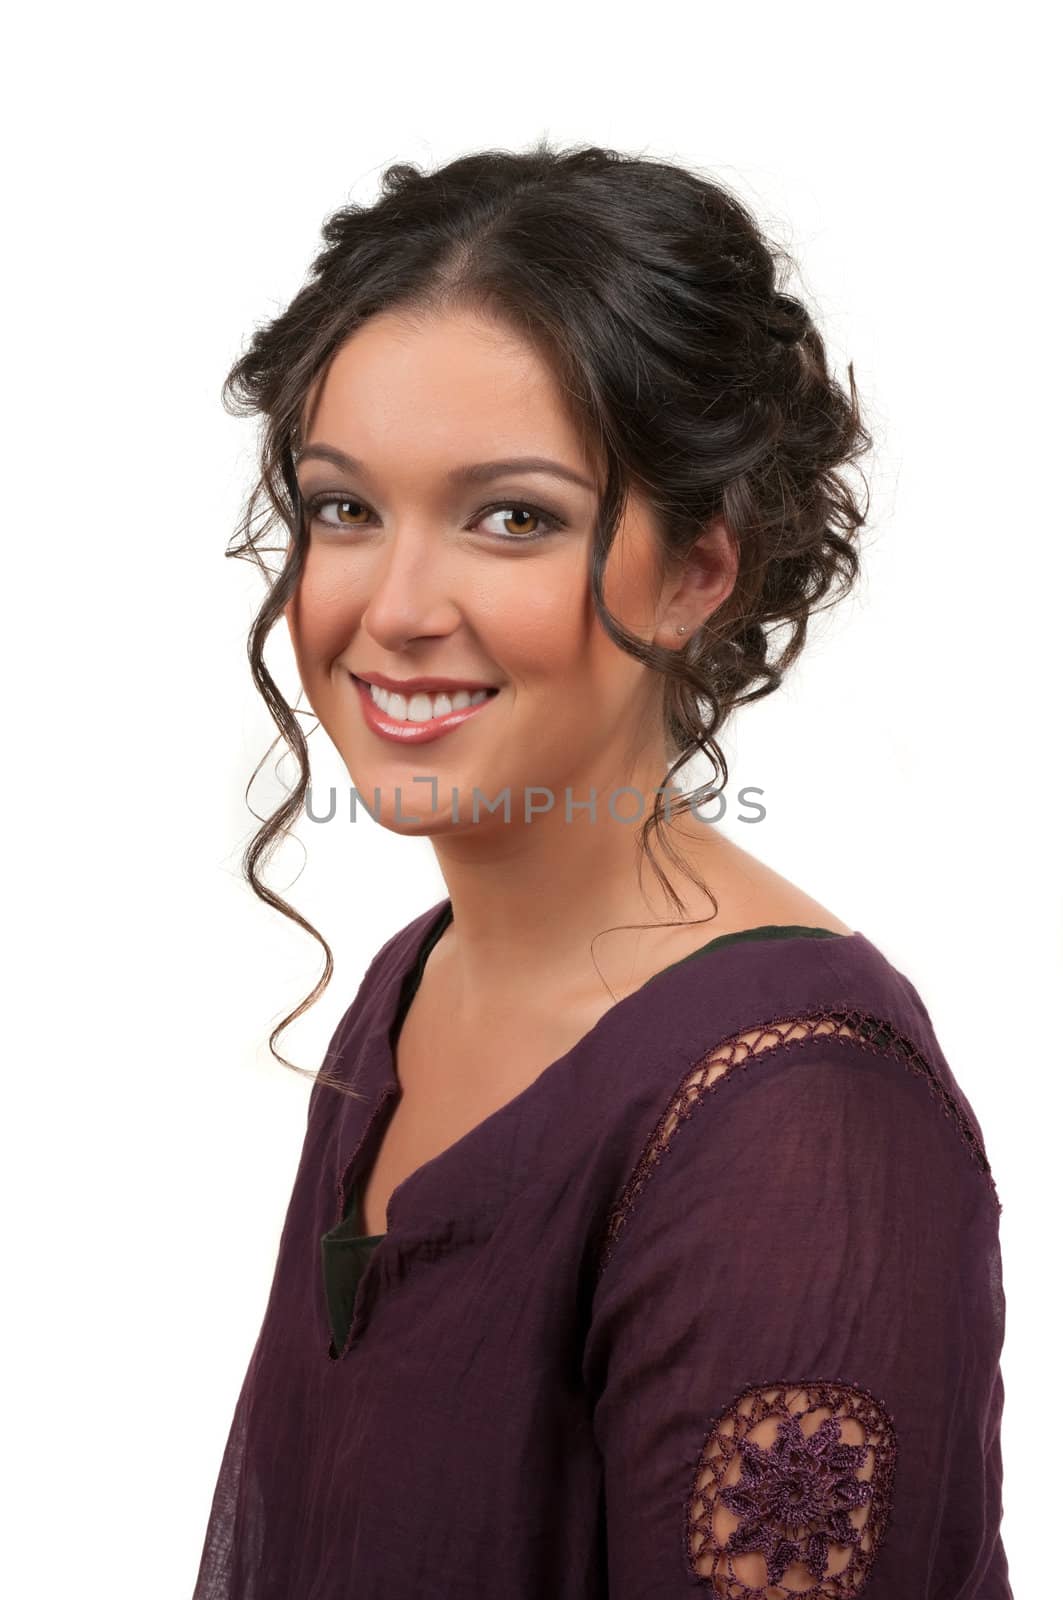 Young woman with beautiful hair style and make up